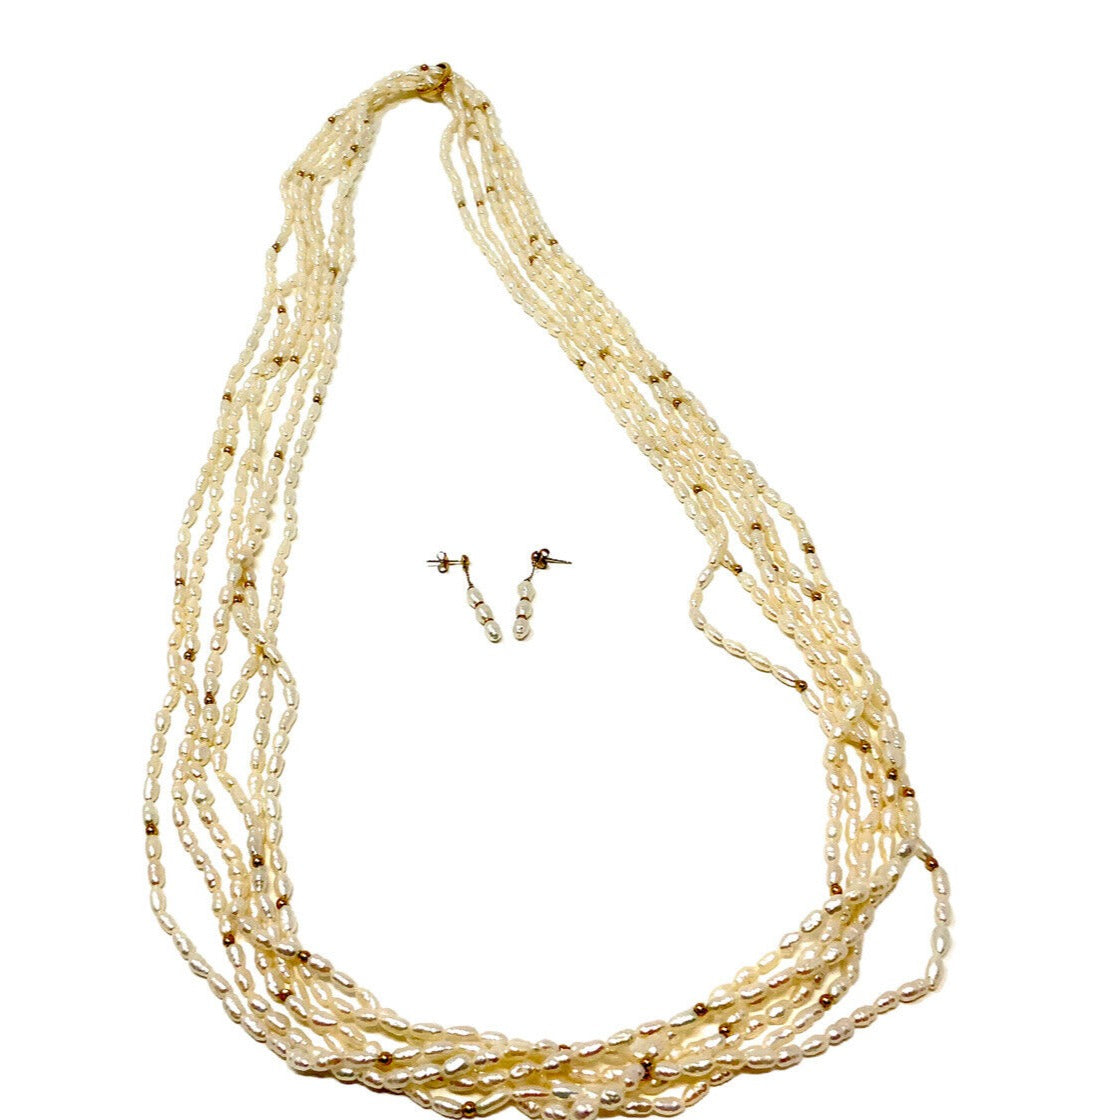 Multi-Strand Mother of Pearl and Gold Vermeil Necklace and Earring Set